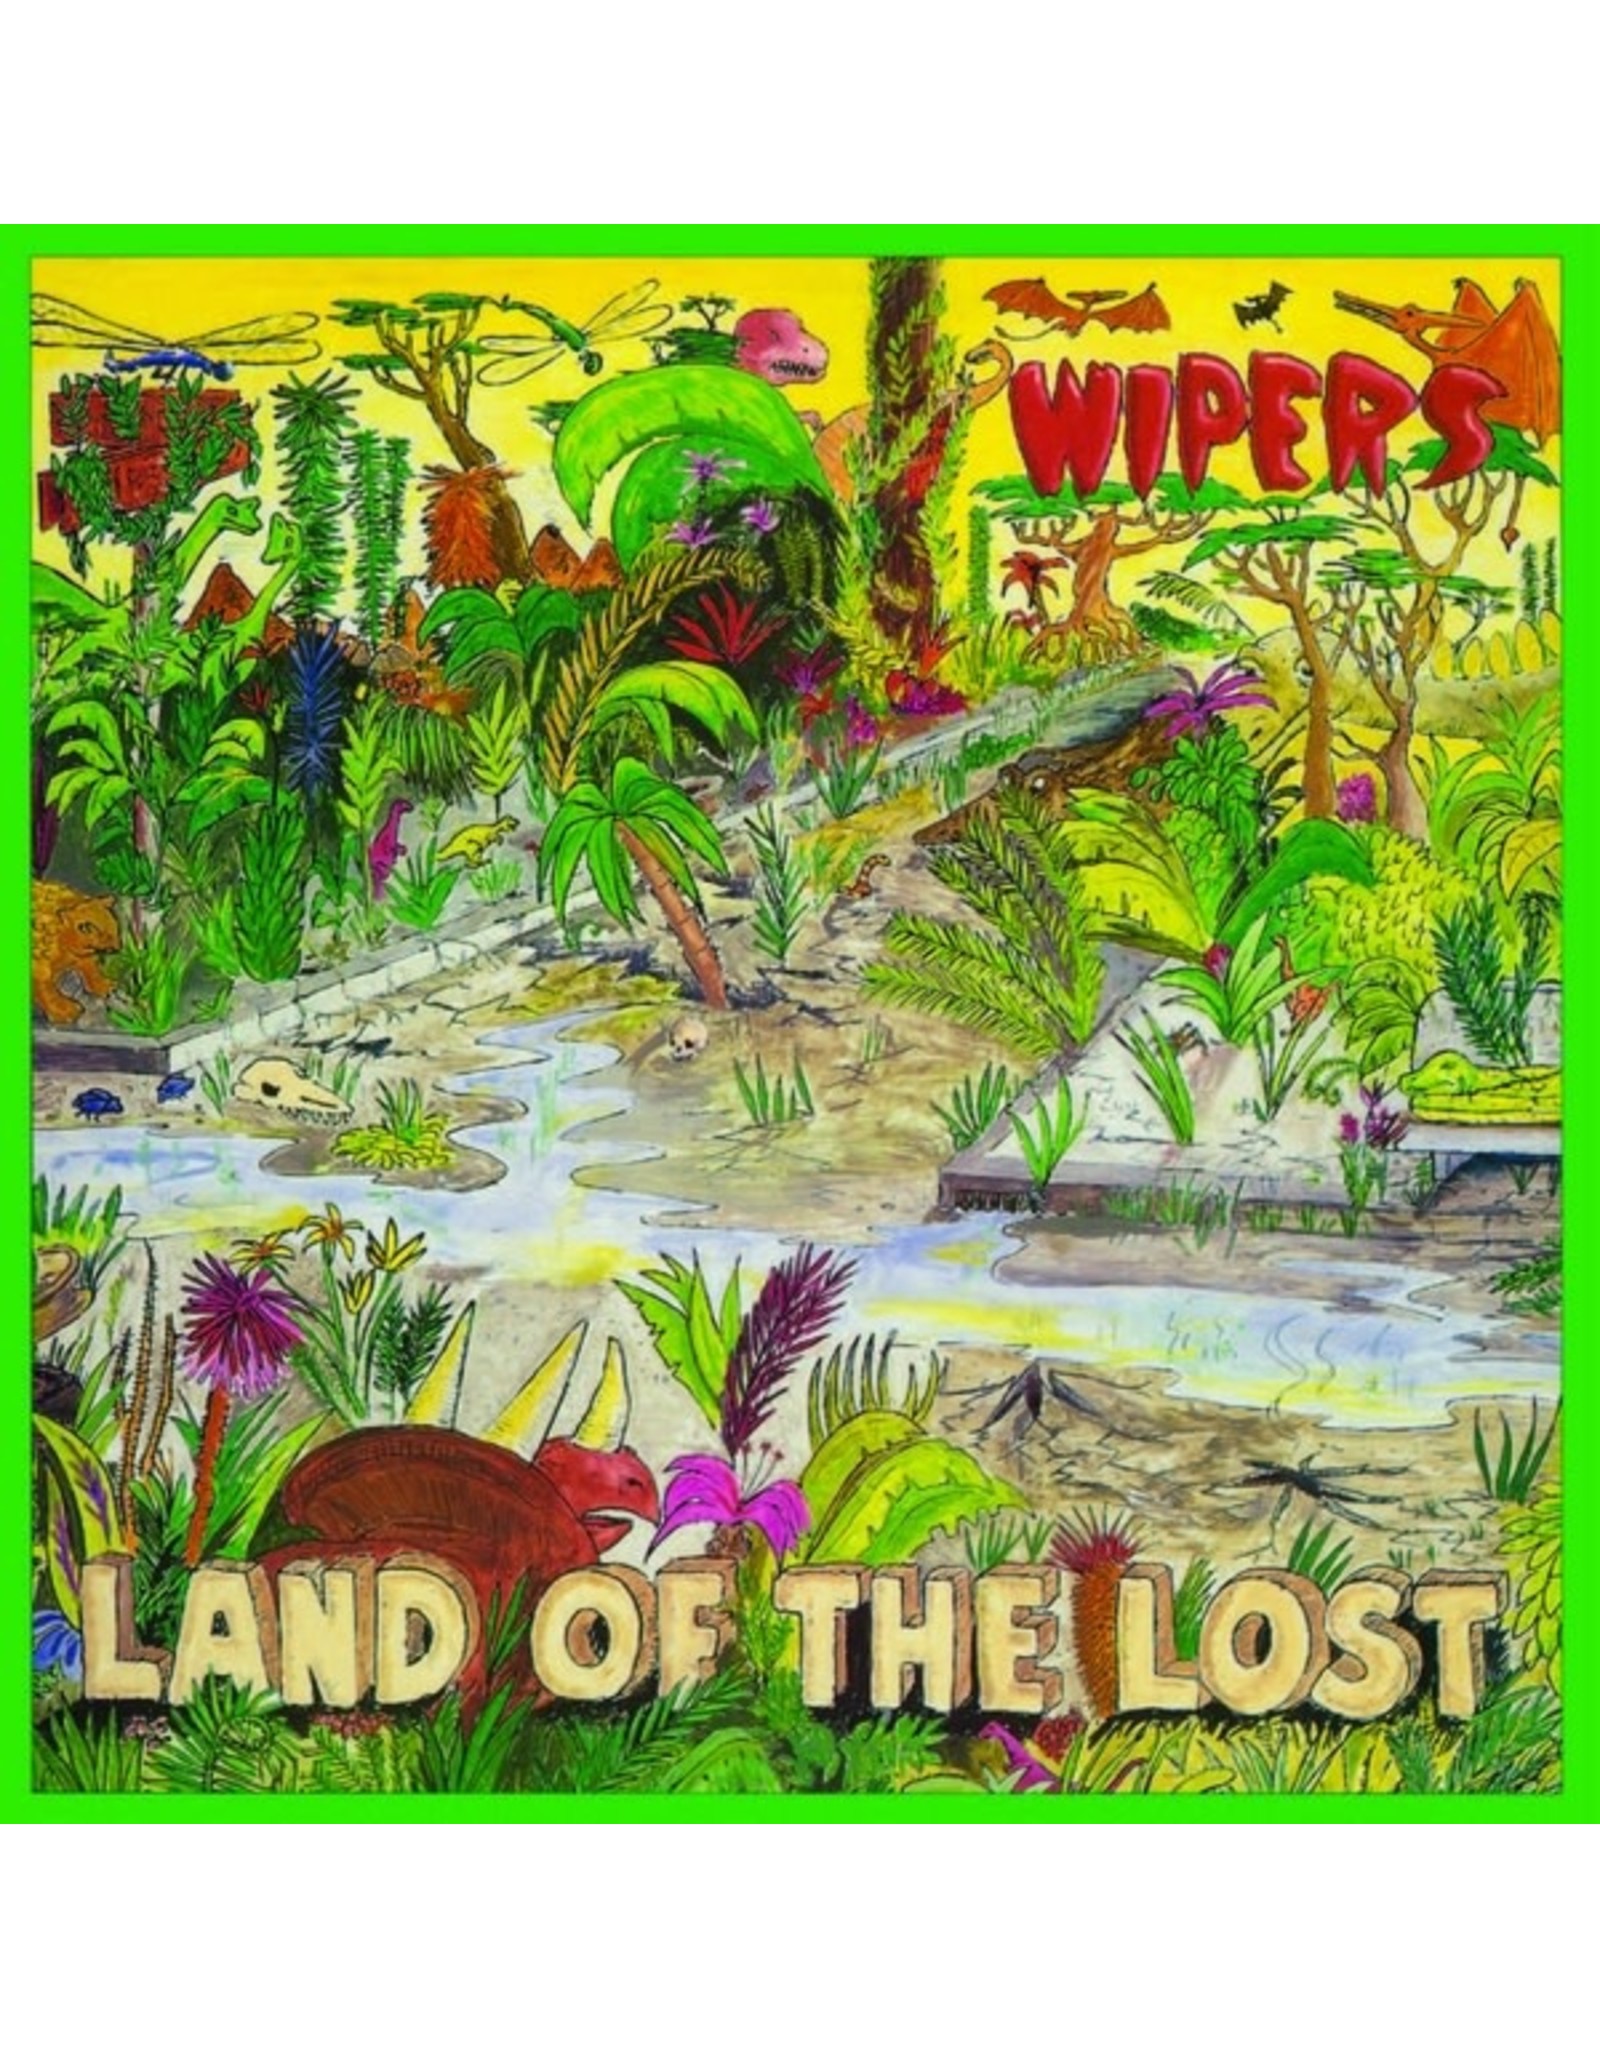 Jackpot Wipers: Land Of The Lost LP